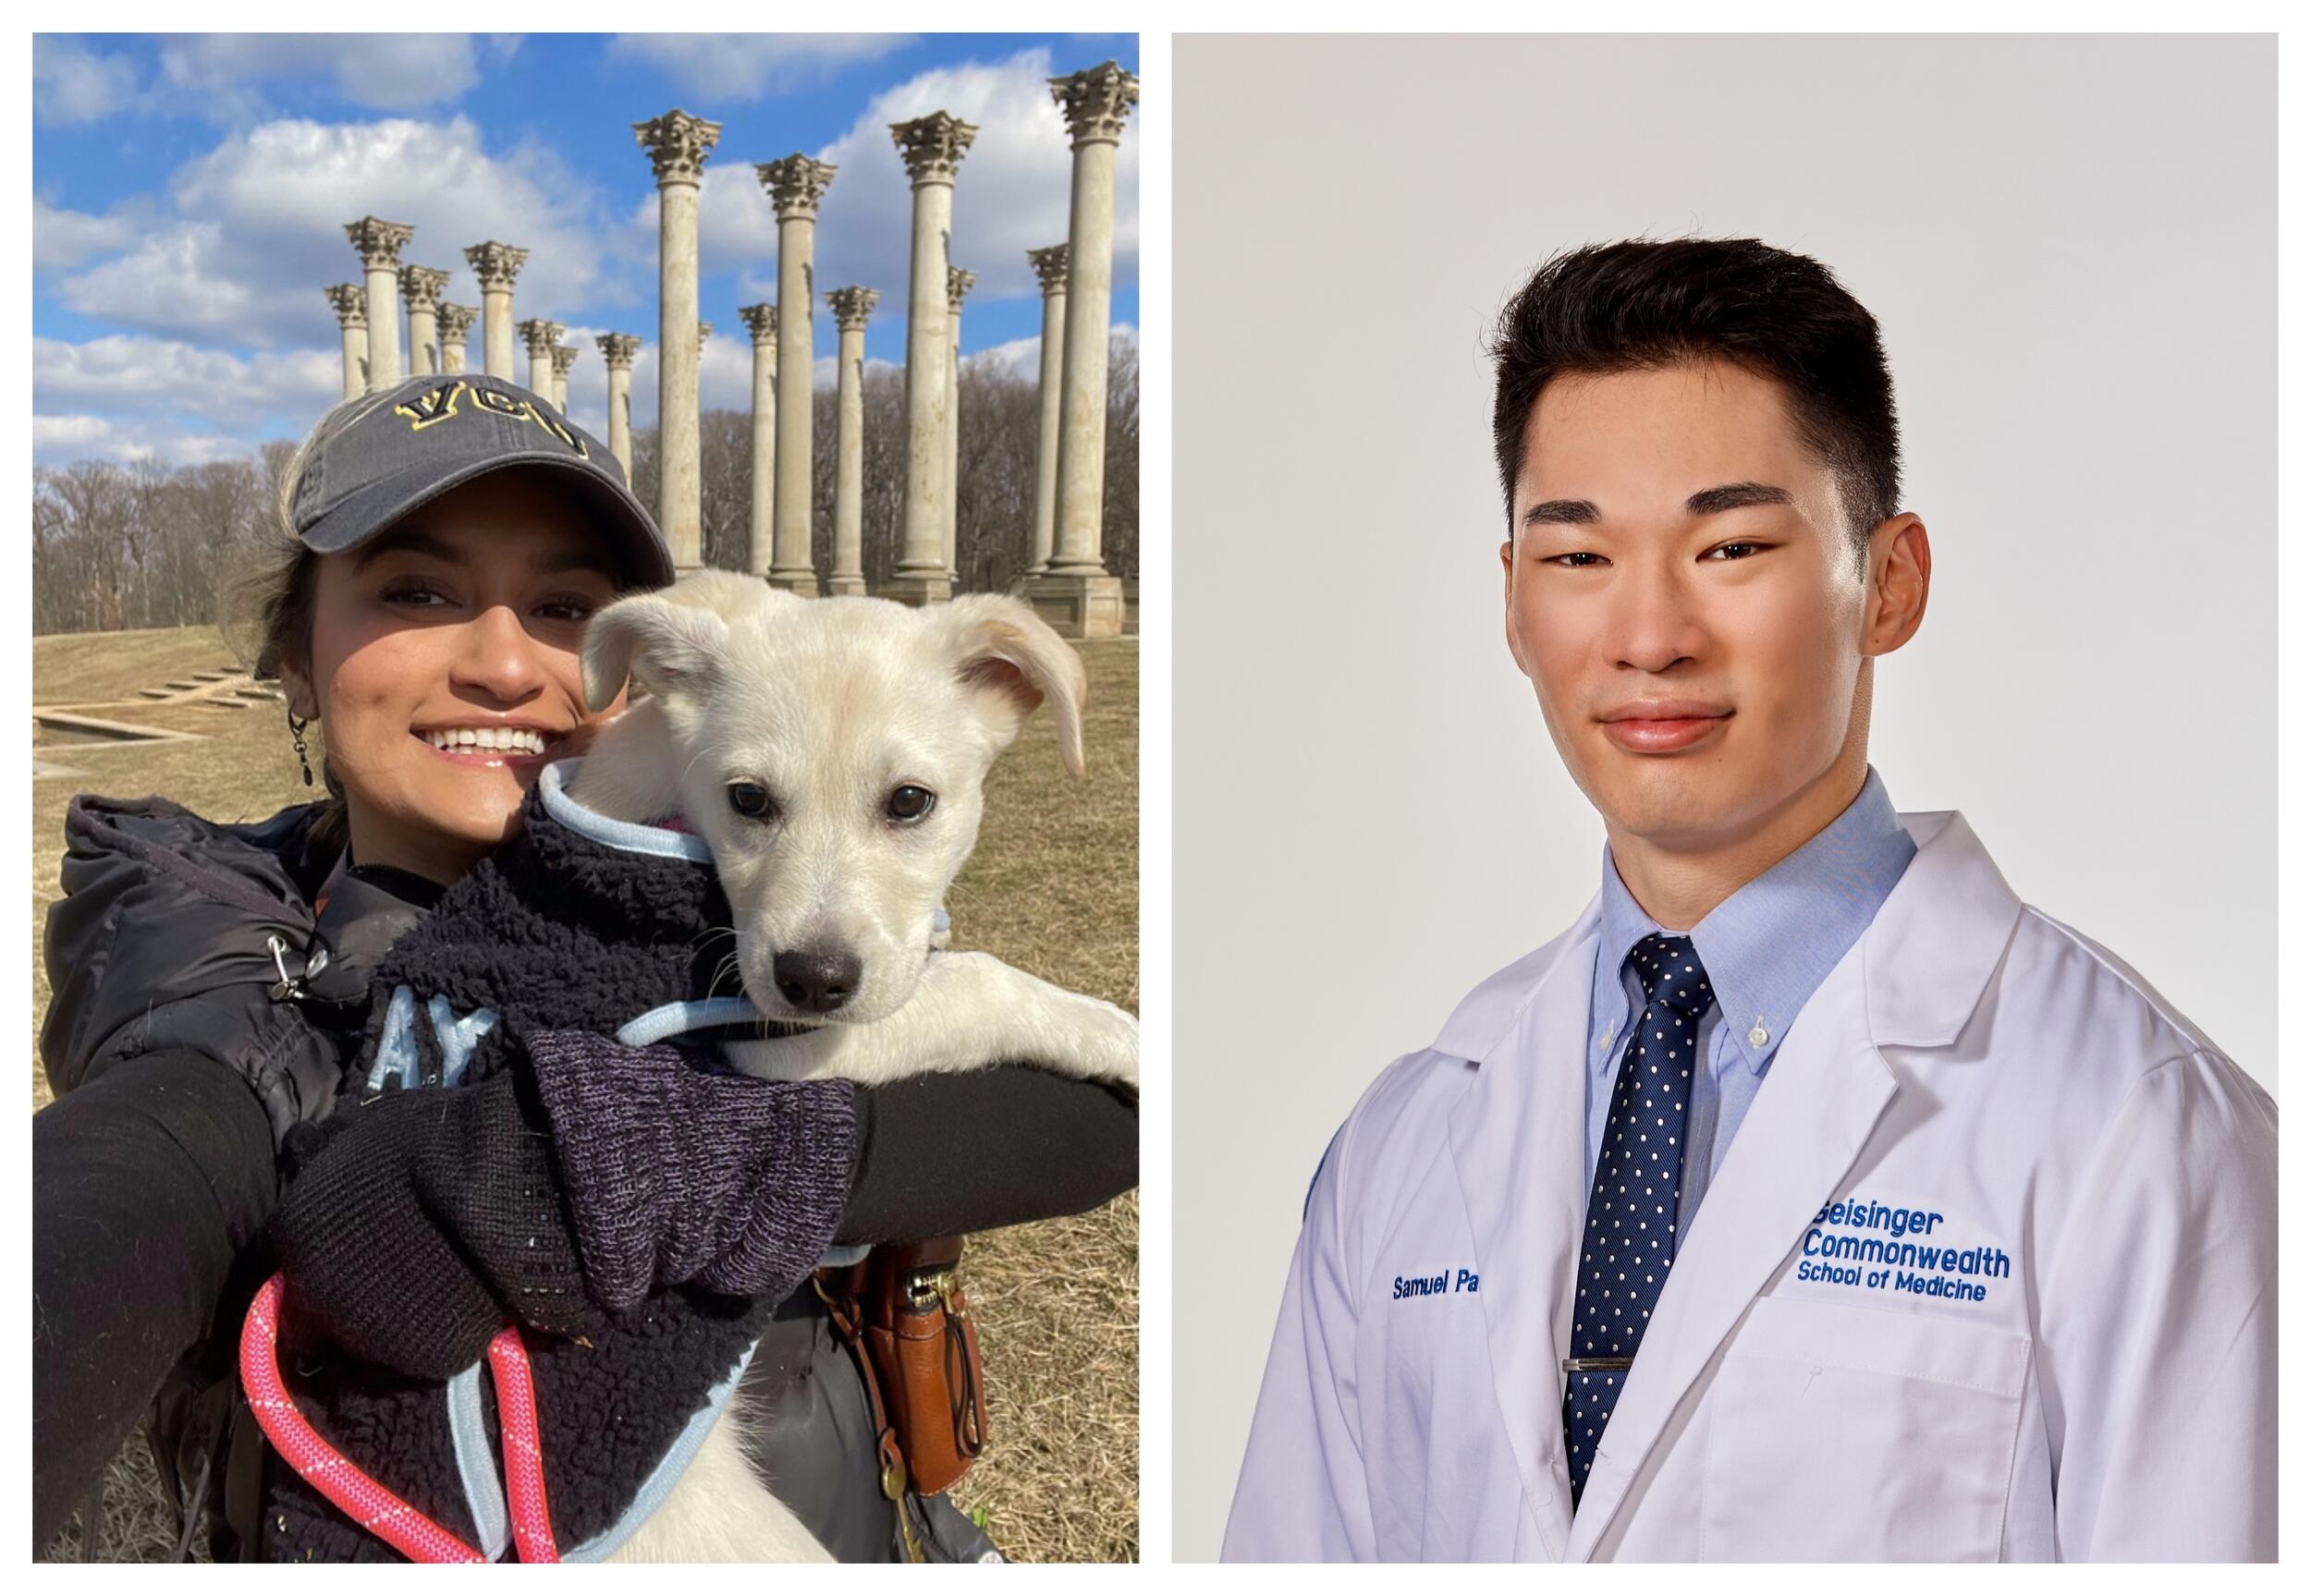 On the left is a photo of a woman holding a dog and on the right is a photo of a man in a white lab coat